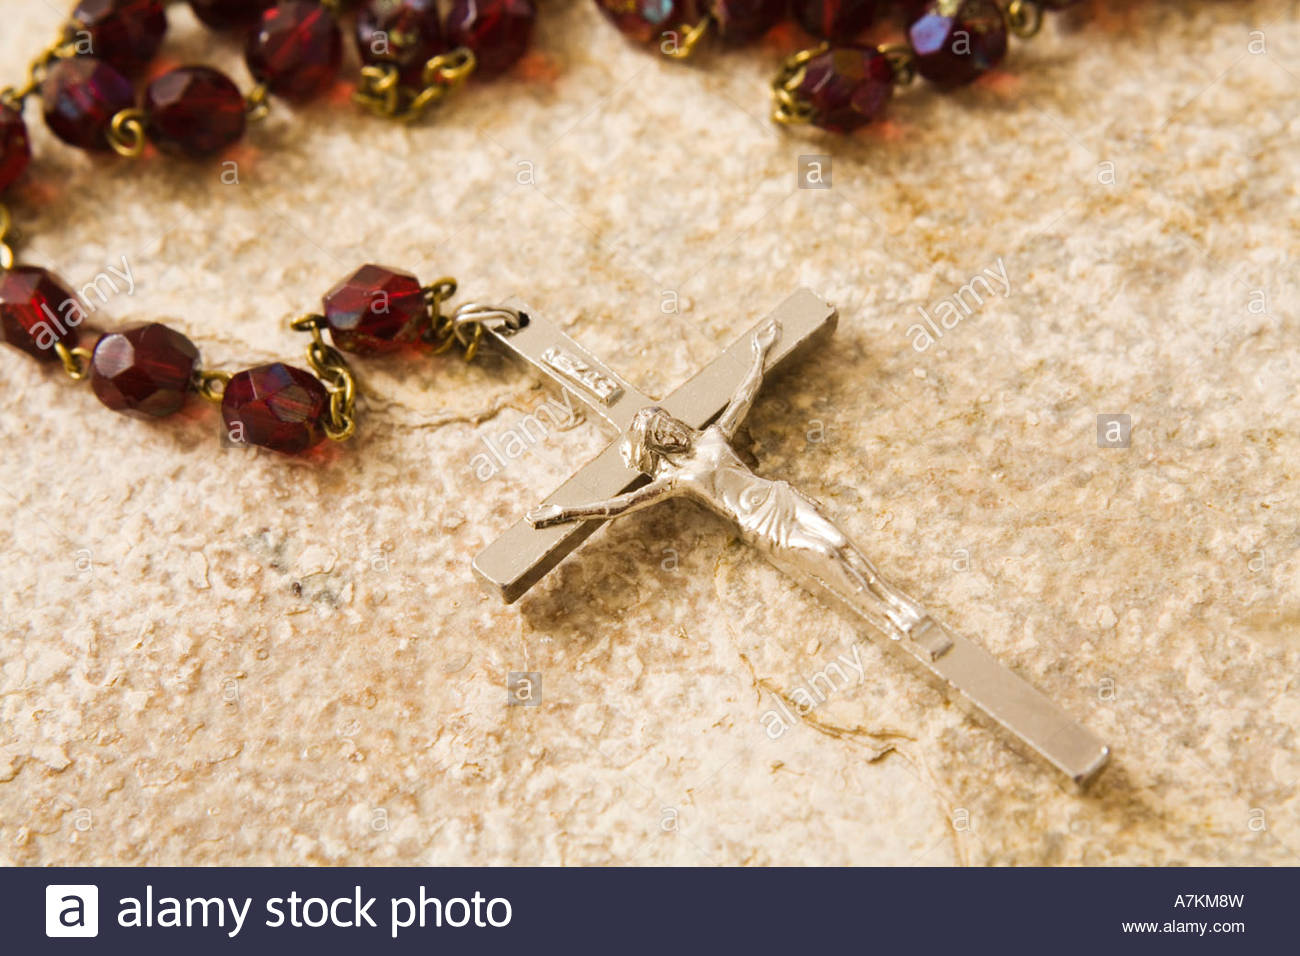 Rosary beads on a sandstone background Stock Photo 11864040   Alamy